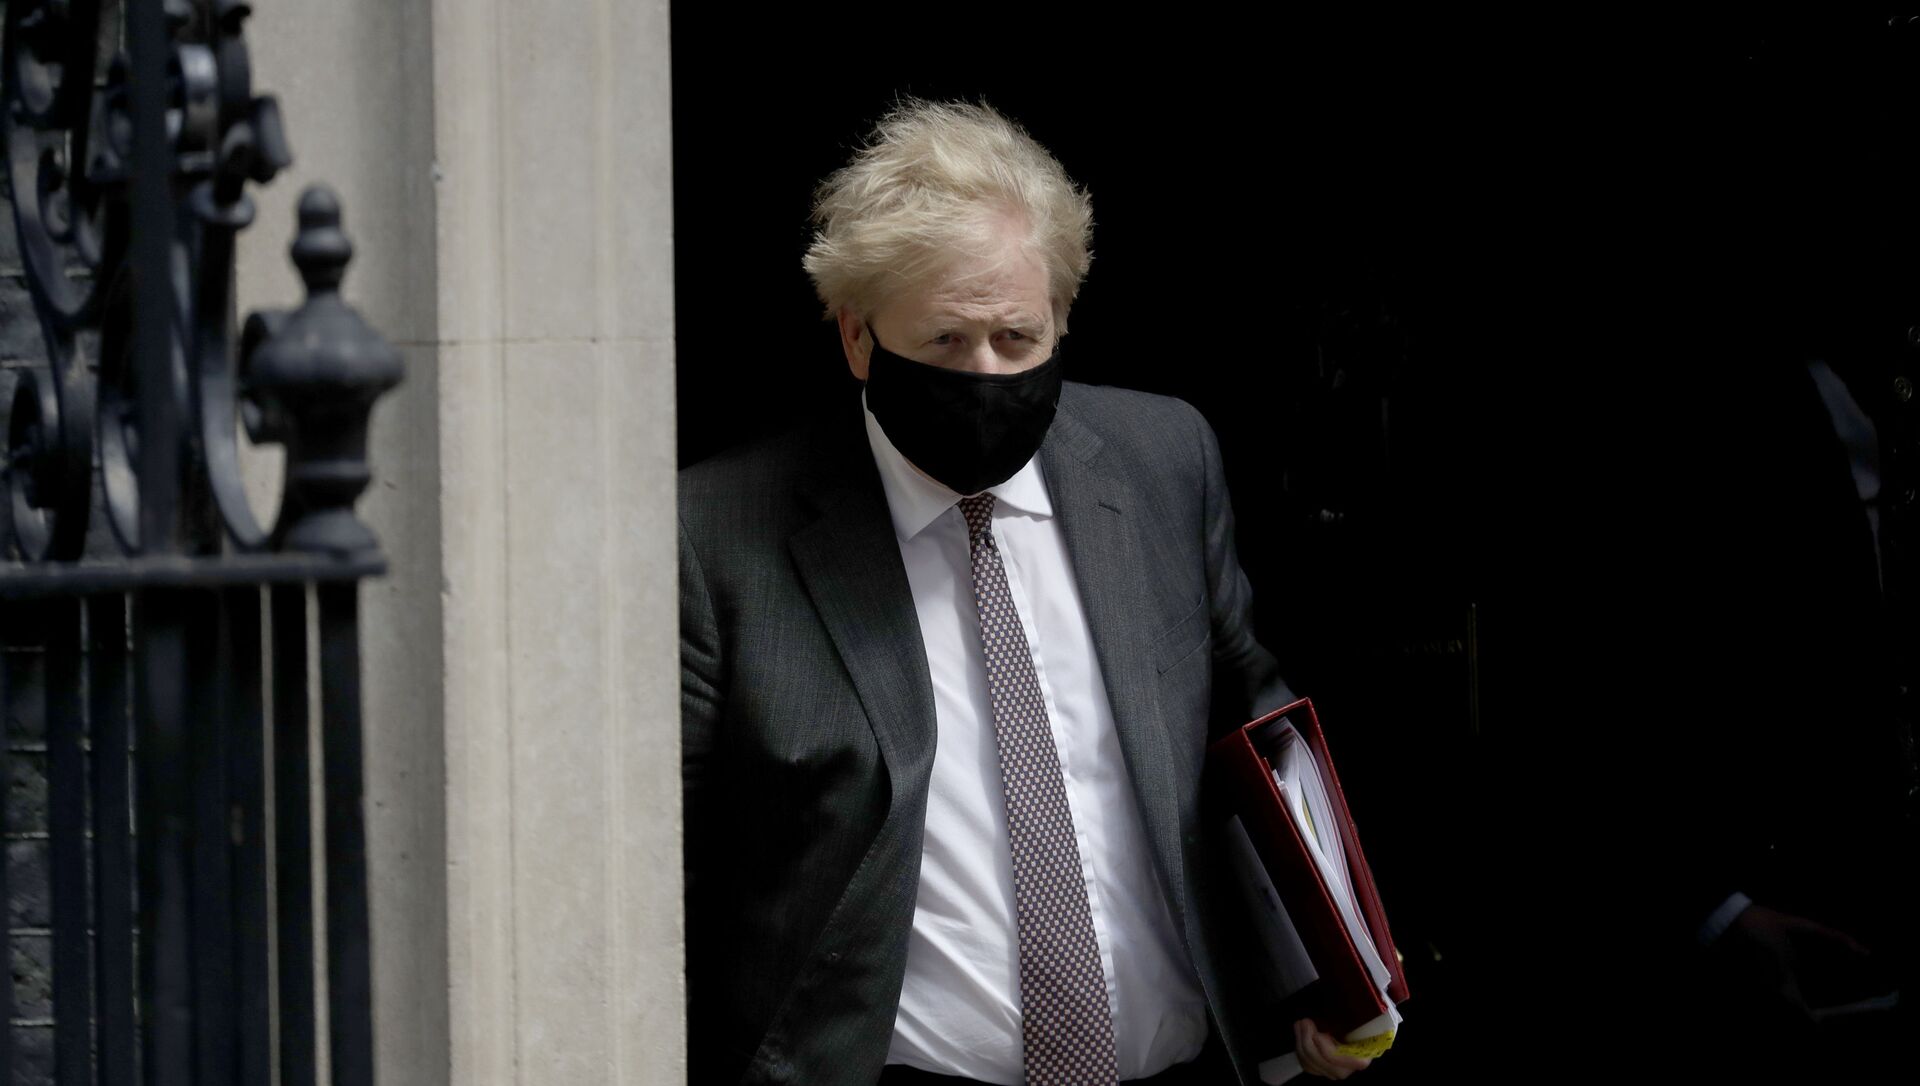 British Prime Minister Boris Johnson leaves 10 Downing Street in London, to attend the weekly Prime Minister's Questions at the Houses of Parliament, in London, Wednesday, April 21, 2021.  - Sputnik International, 1920, 15.05.2021